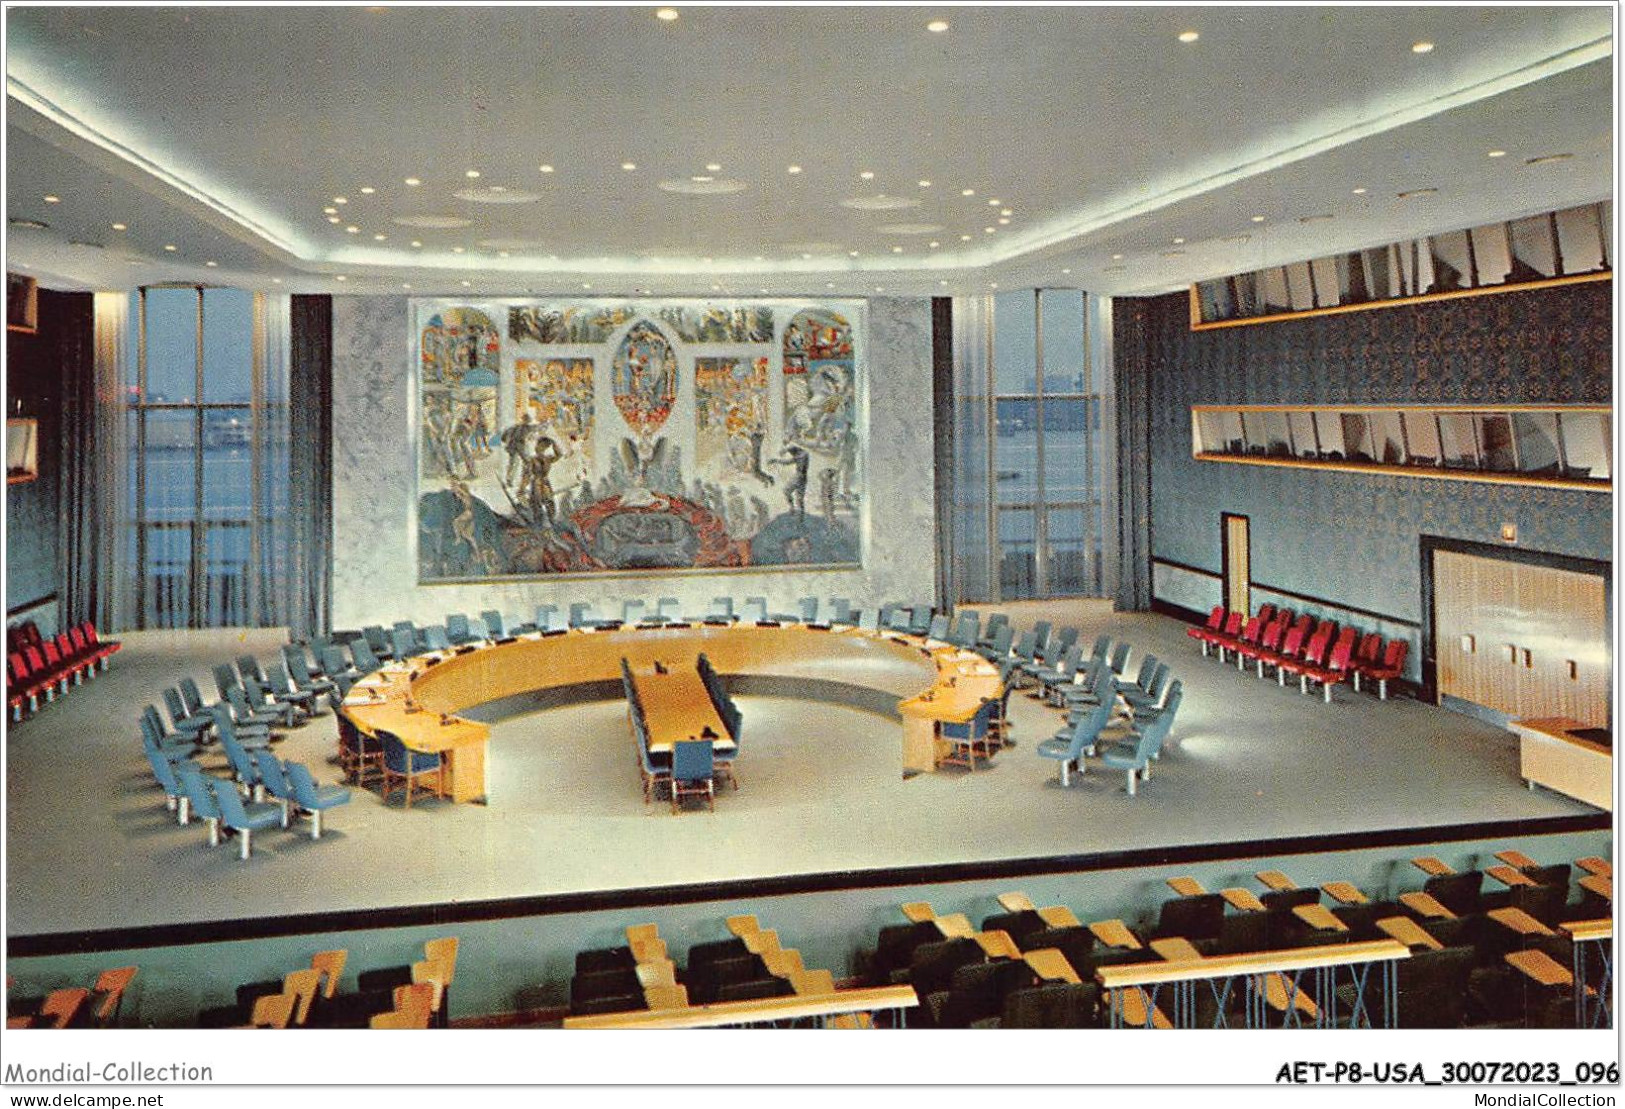 AETP8-USA-0658 - NEW YORK - Security Council Chamber - Andere Monumente & Gebäude